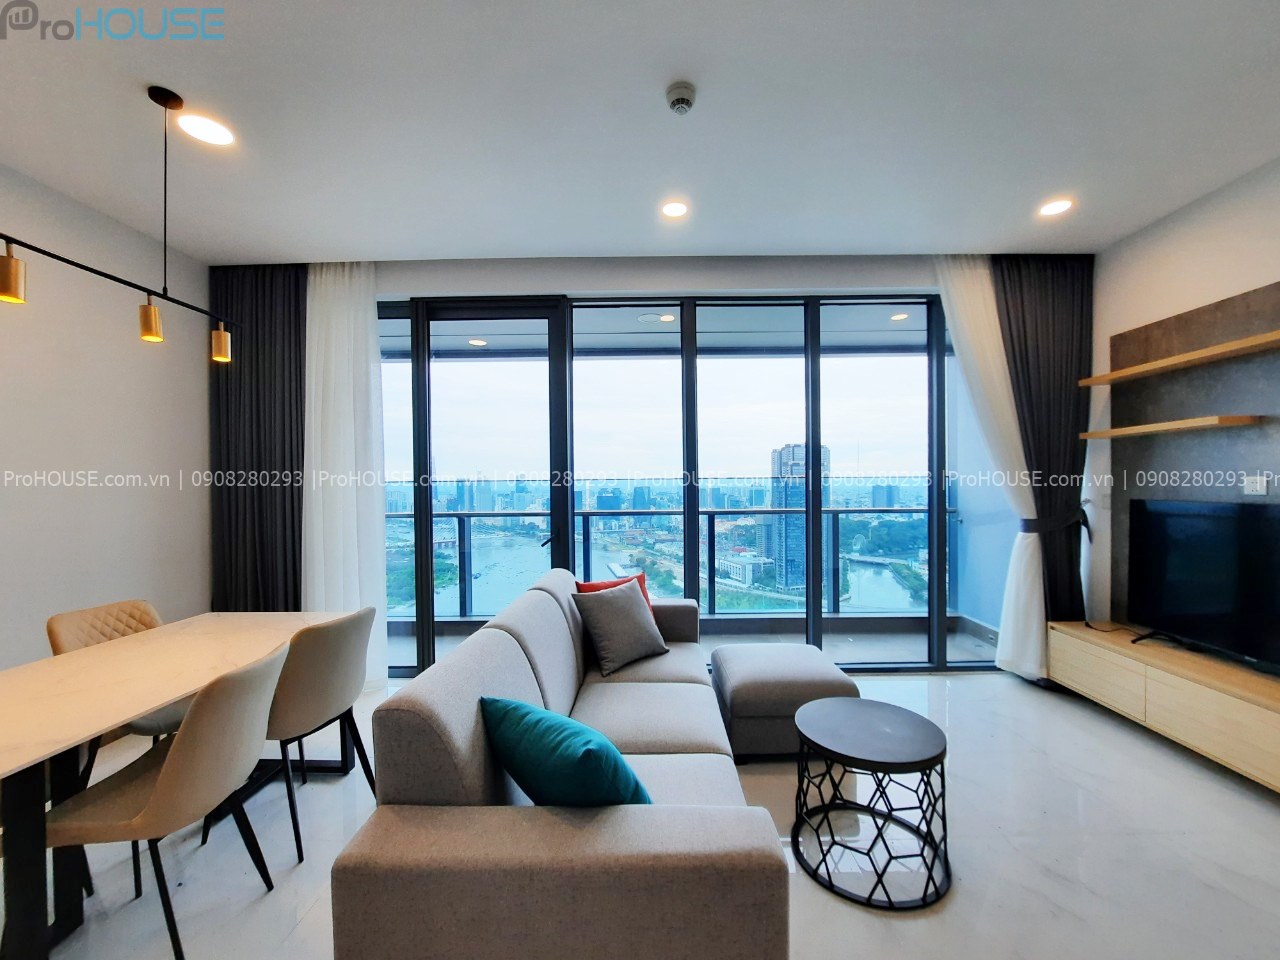 Luxury 2BR apartment at Sunwah Pearl for sale with Thu Thiem 2 bridge view